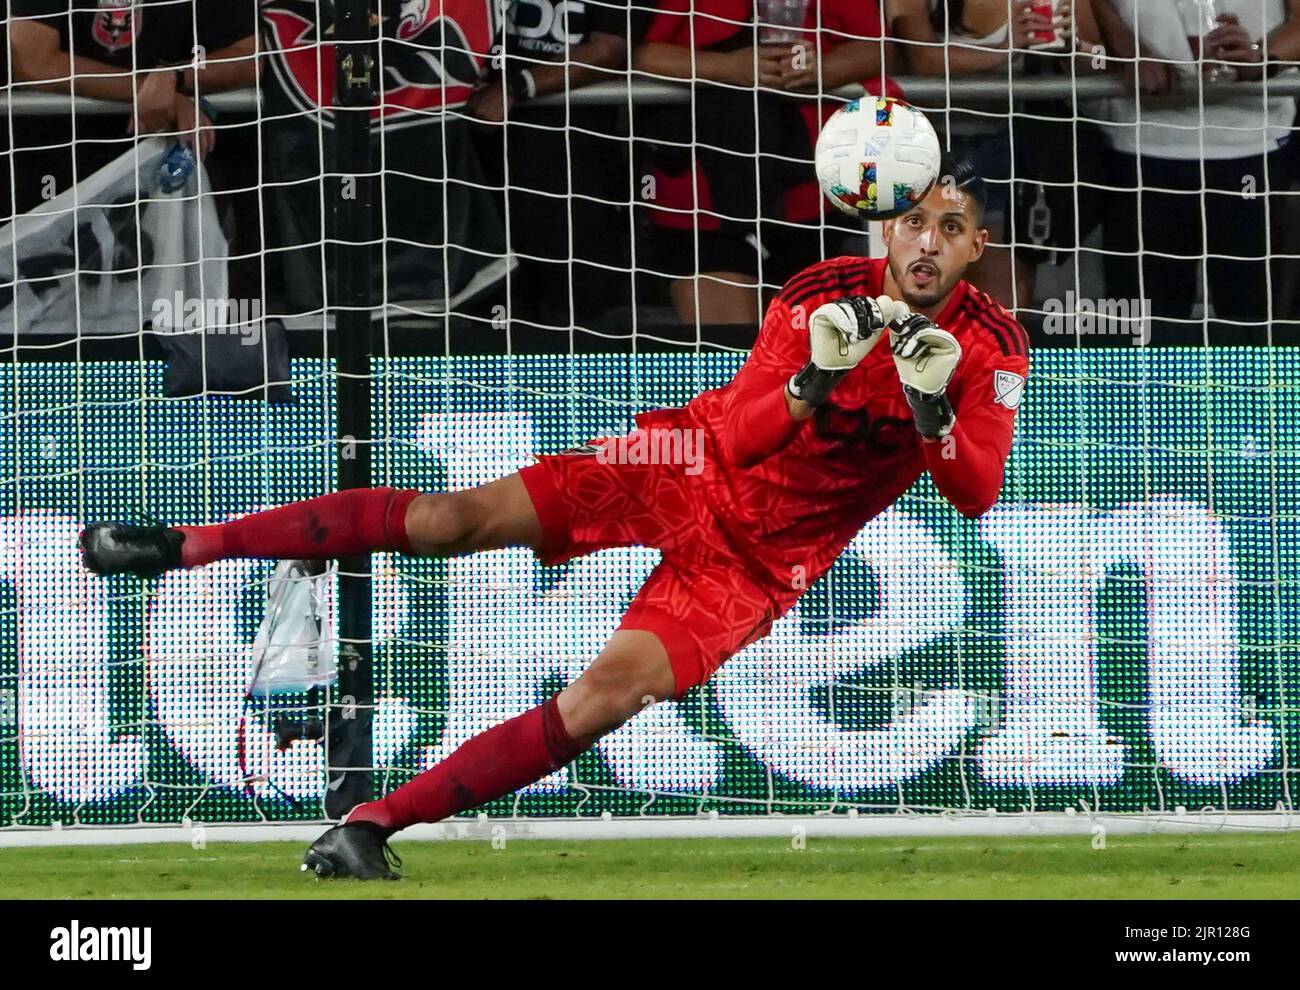 WASHINGTON, DC, USA - 20 AUGUST 2022: D.C. United goalkeeper Rafael Romo (1) makes a save during a MLS match between D.C United and the Philadelphia Union on August 20, 2022, at Audi Field, in Washington, DC. (Photo by Tony Quinn-Alamy Live News) Stock Photo